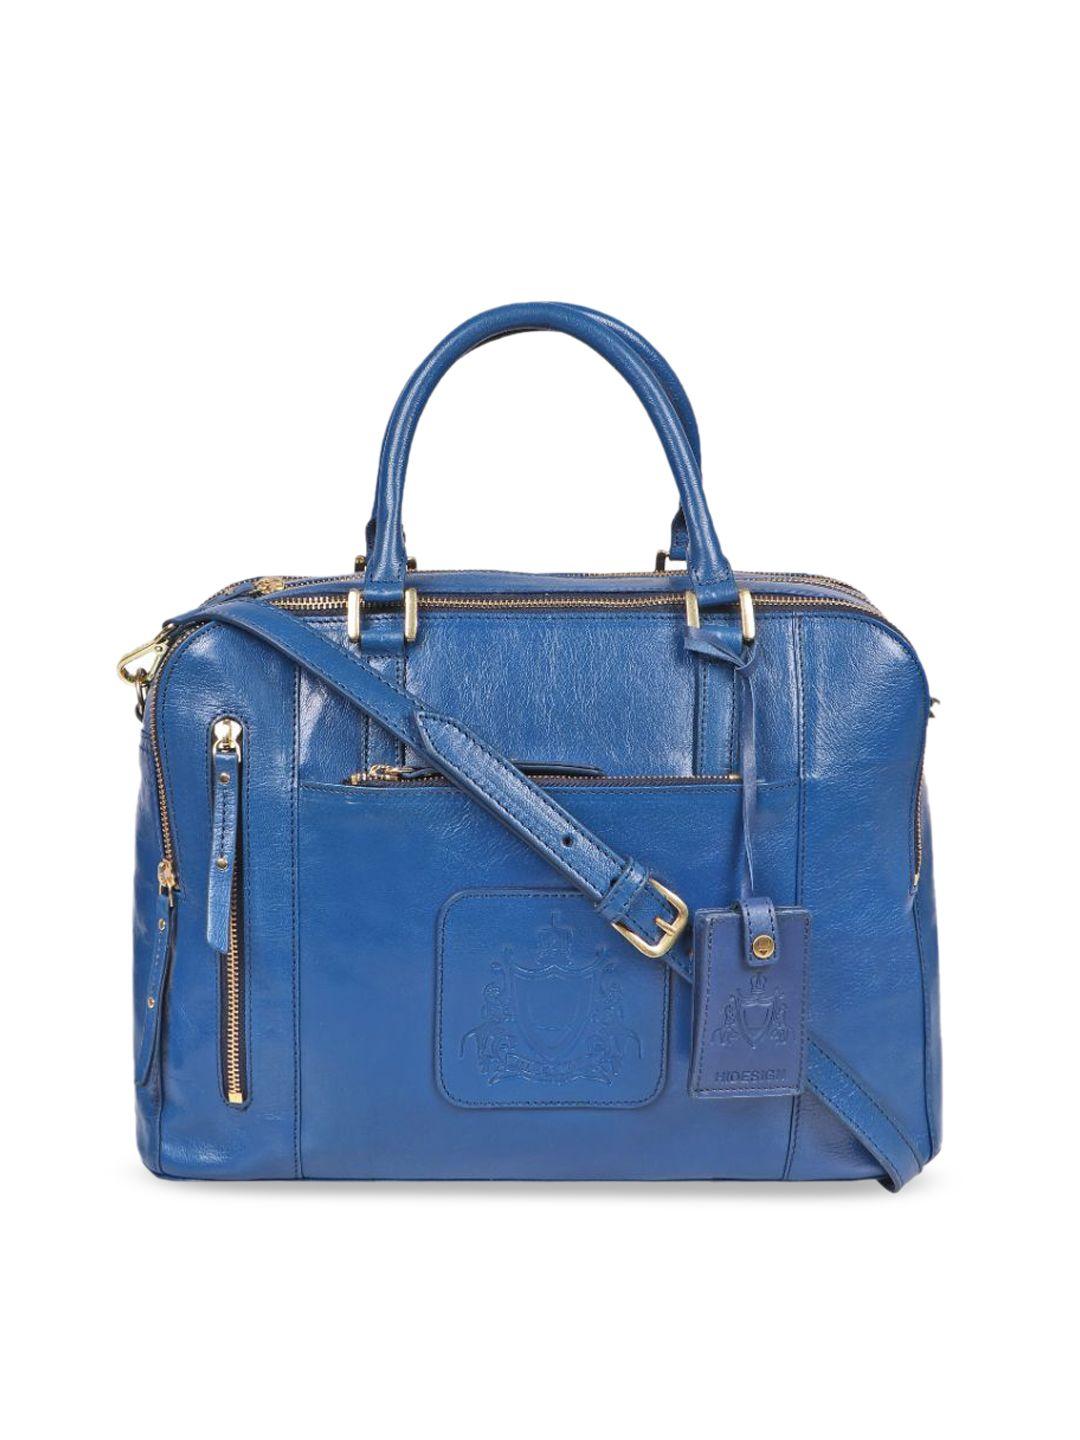 hidesign blue leather structured handheld bag with tasselled